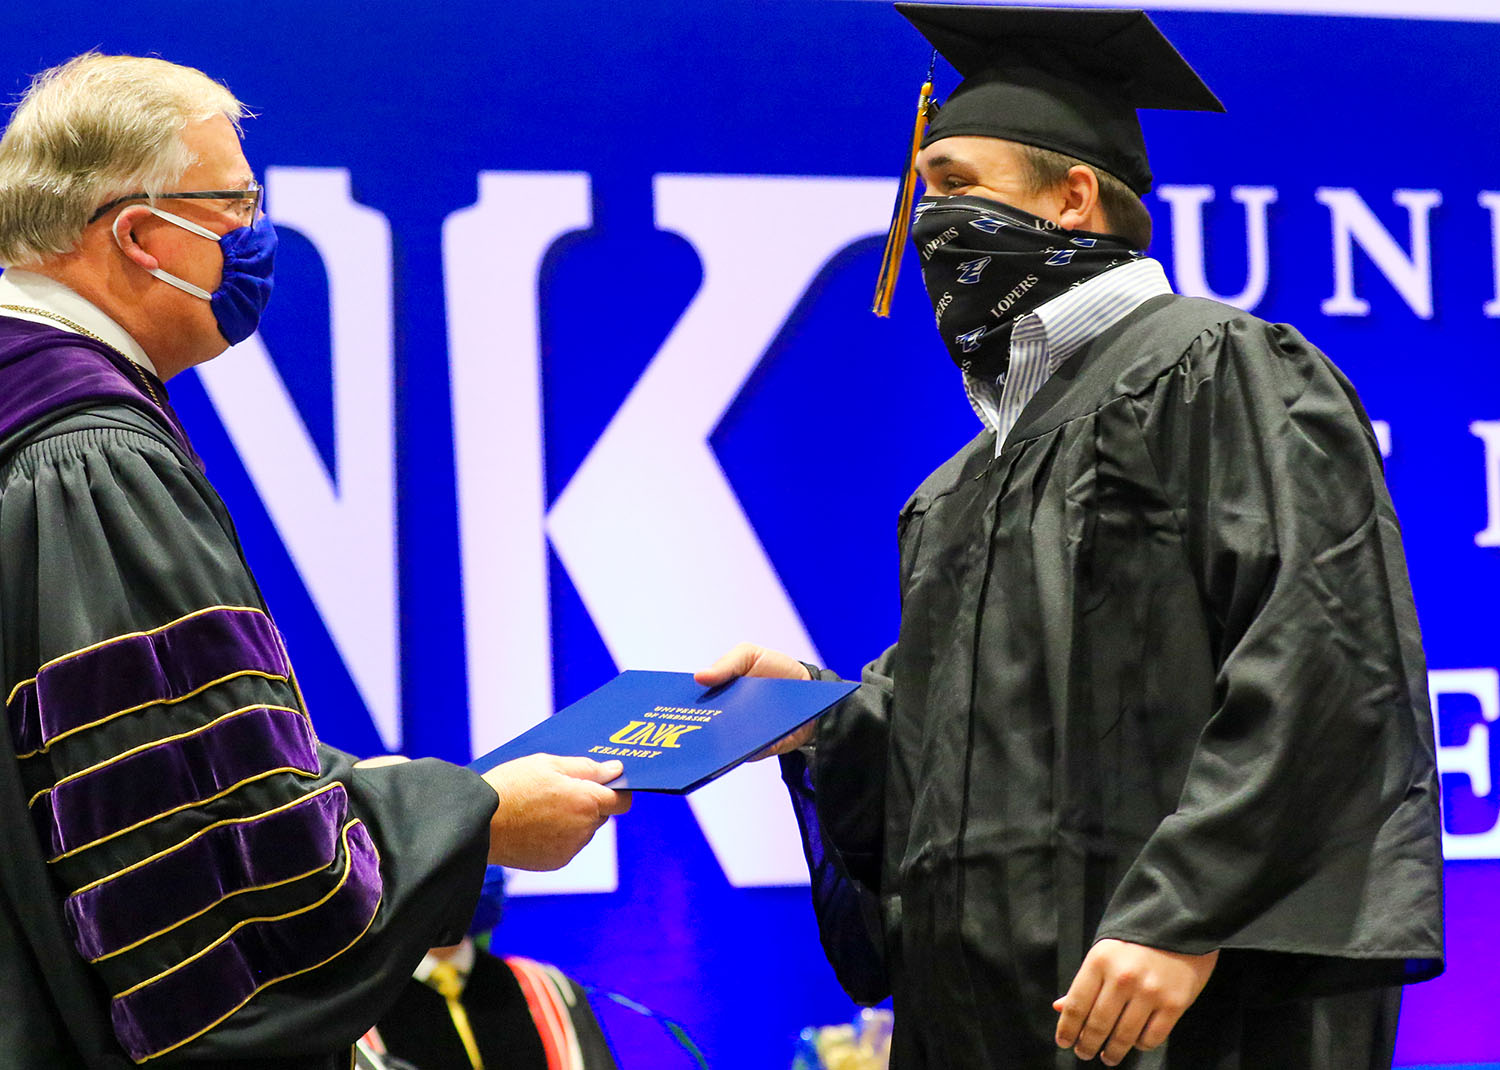 Logan Bunger of McCook, right, receives his degree from UNK Chancellor Doug Kristensen during Friday’s commencement ceremony. Bunger, who earned a bachelor’s degree in agribusiness, already accepted a job with Holdrege-based Nebraskaland Aviation.